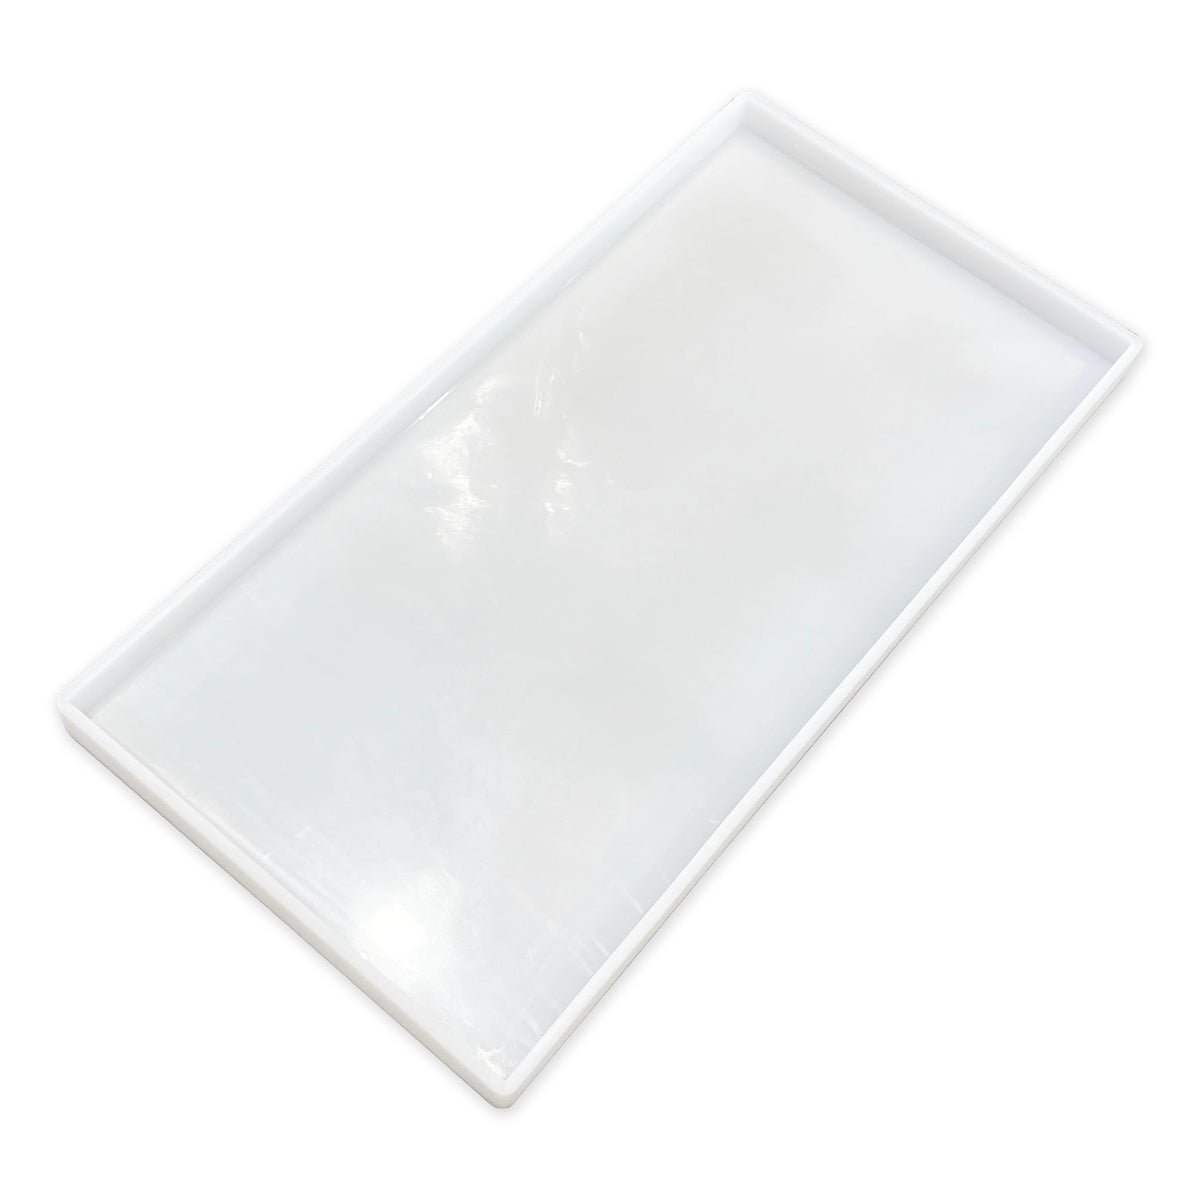 1 Silicone Resin Mold Rectangle White 72mm MOLD13 